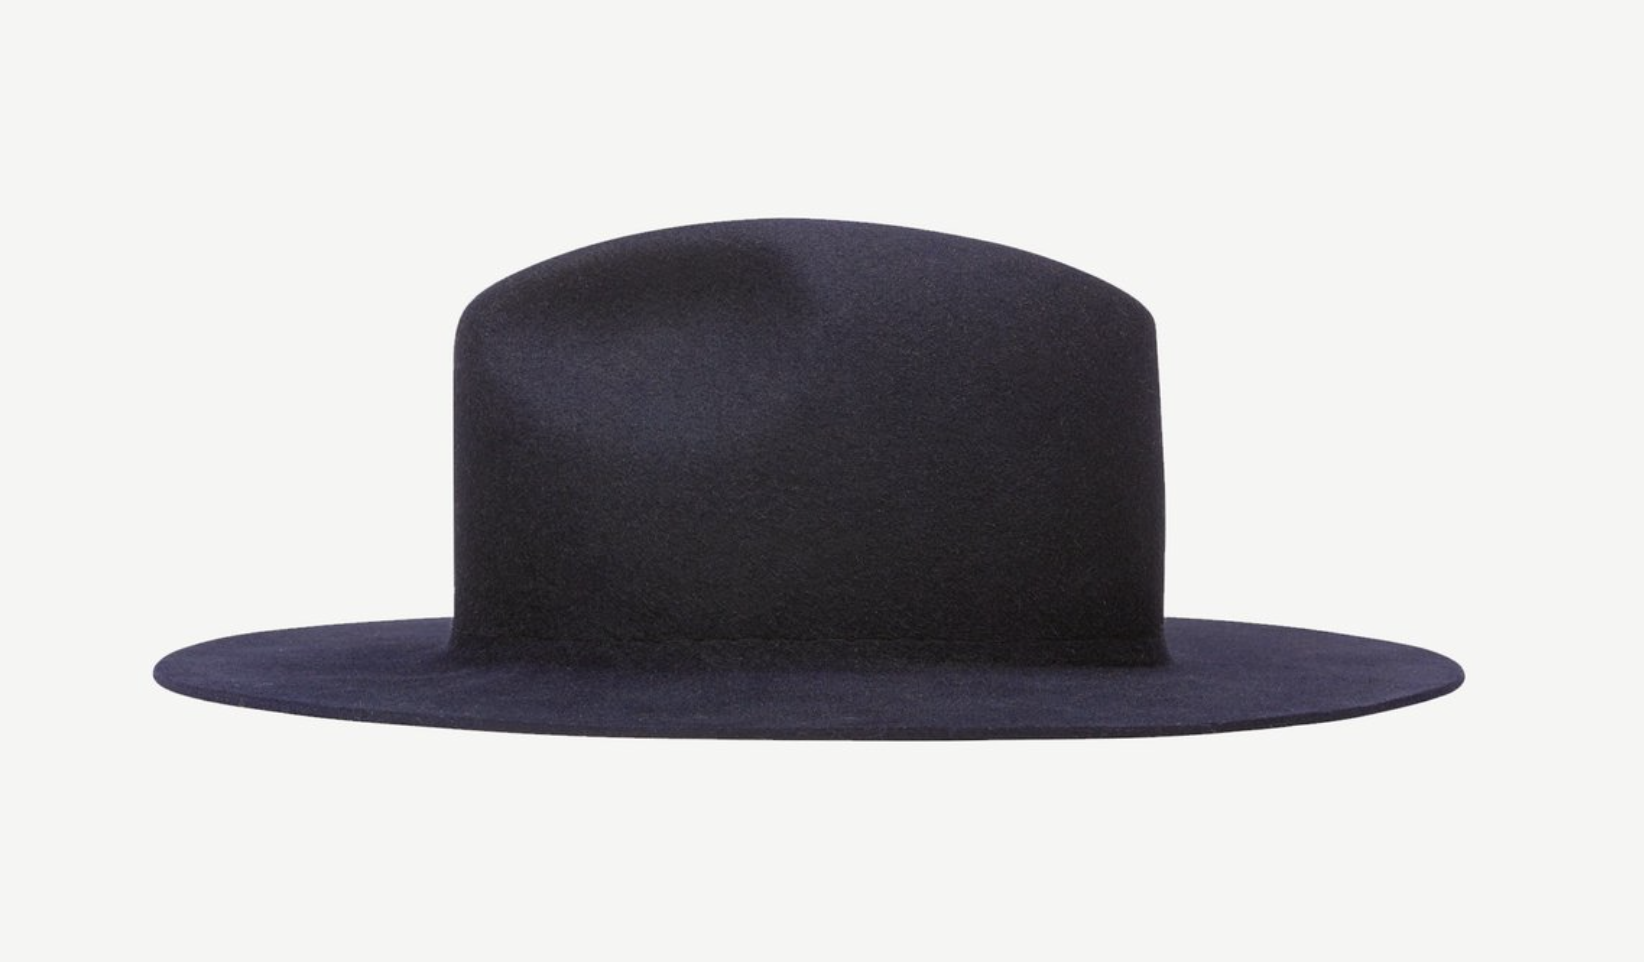 Gavoha Trooper hat in Navy - FASHION GIFT IDEAS - THE ULTIMATE GIFT LIST FOR MODERN MEN